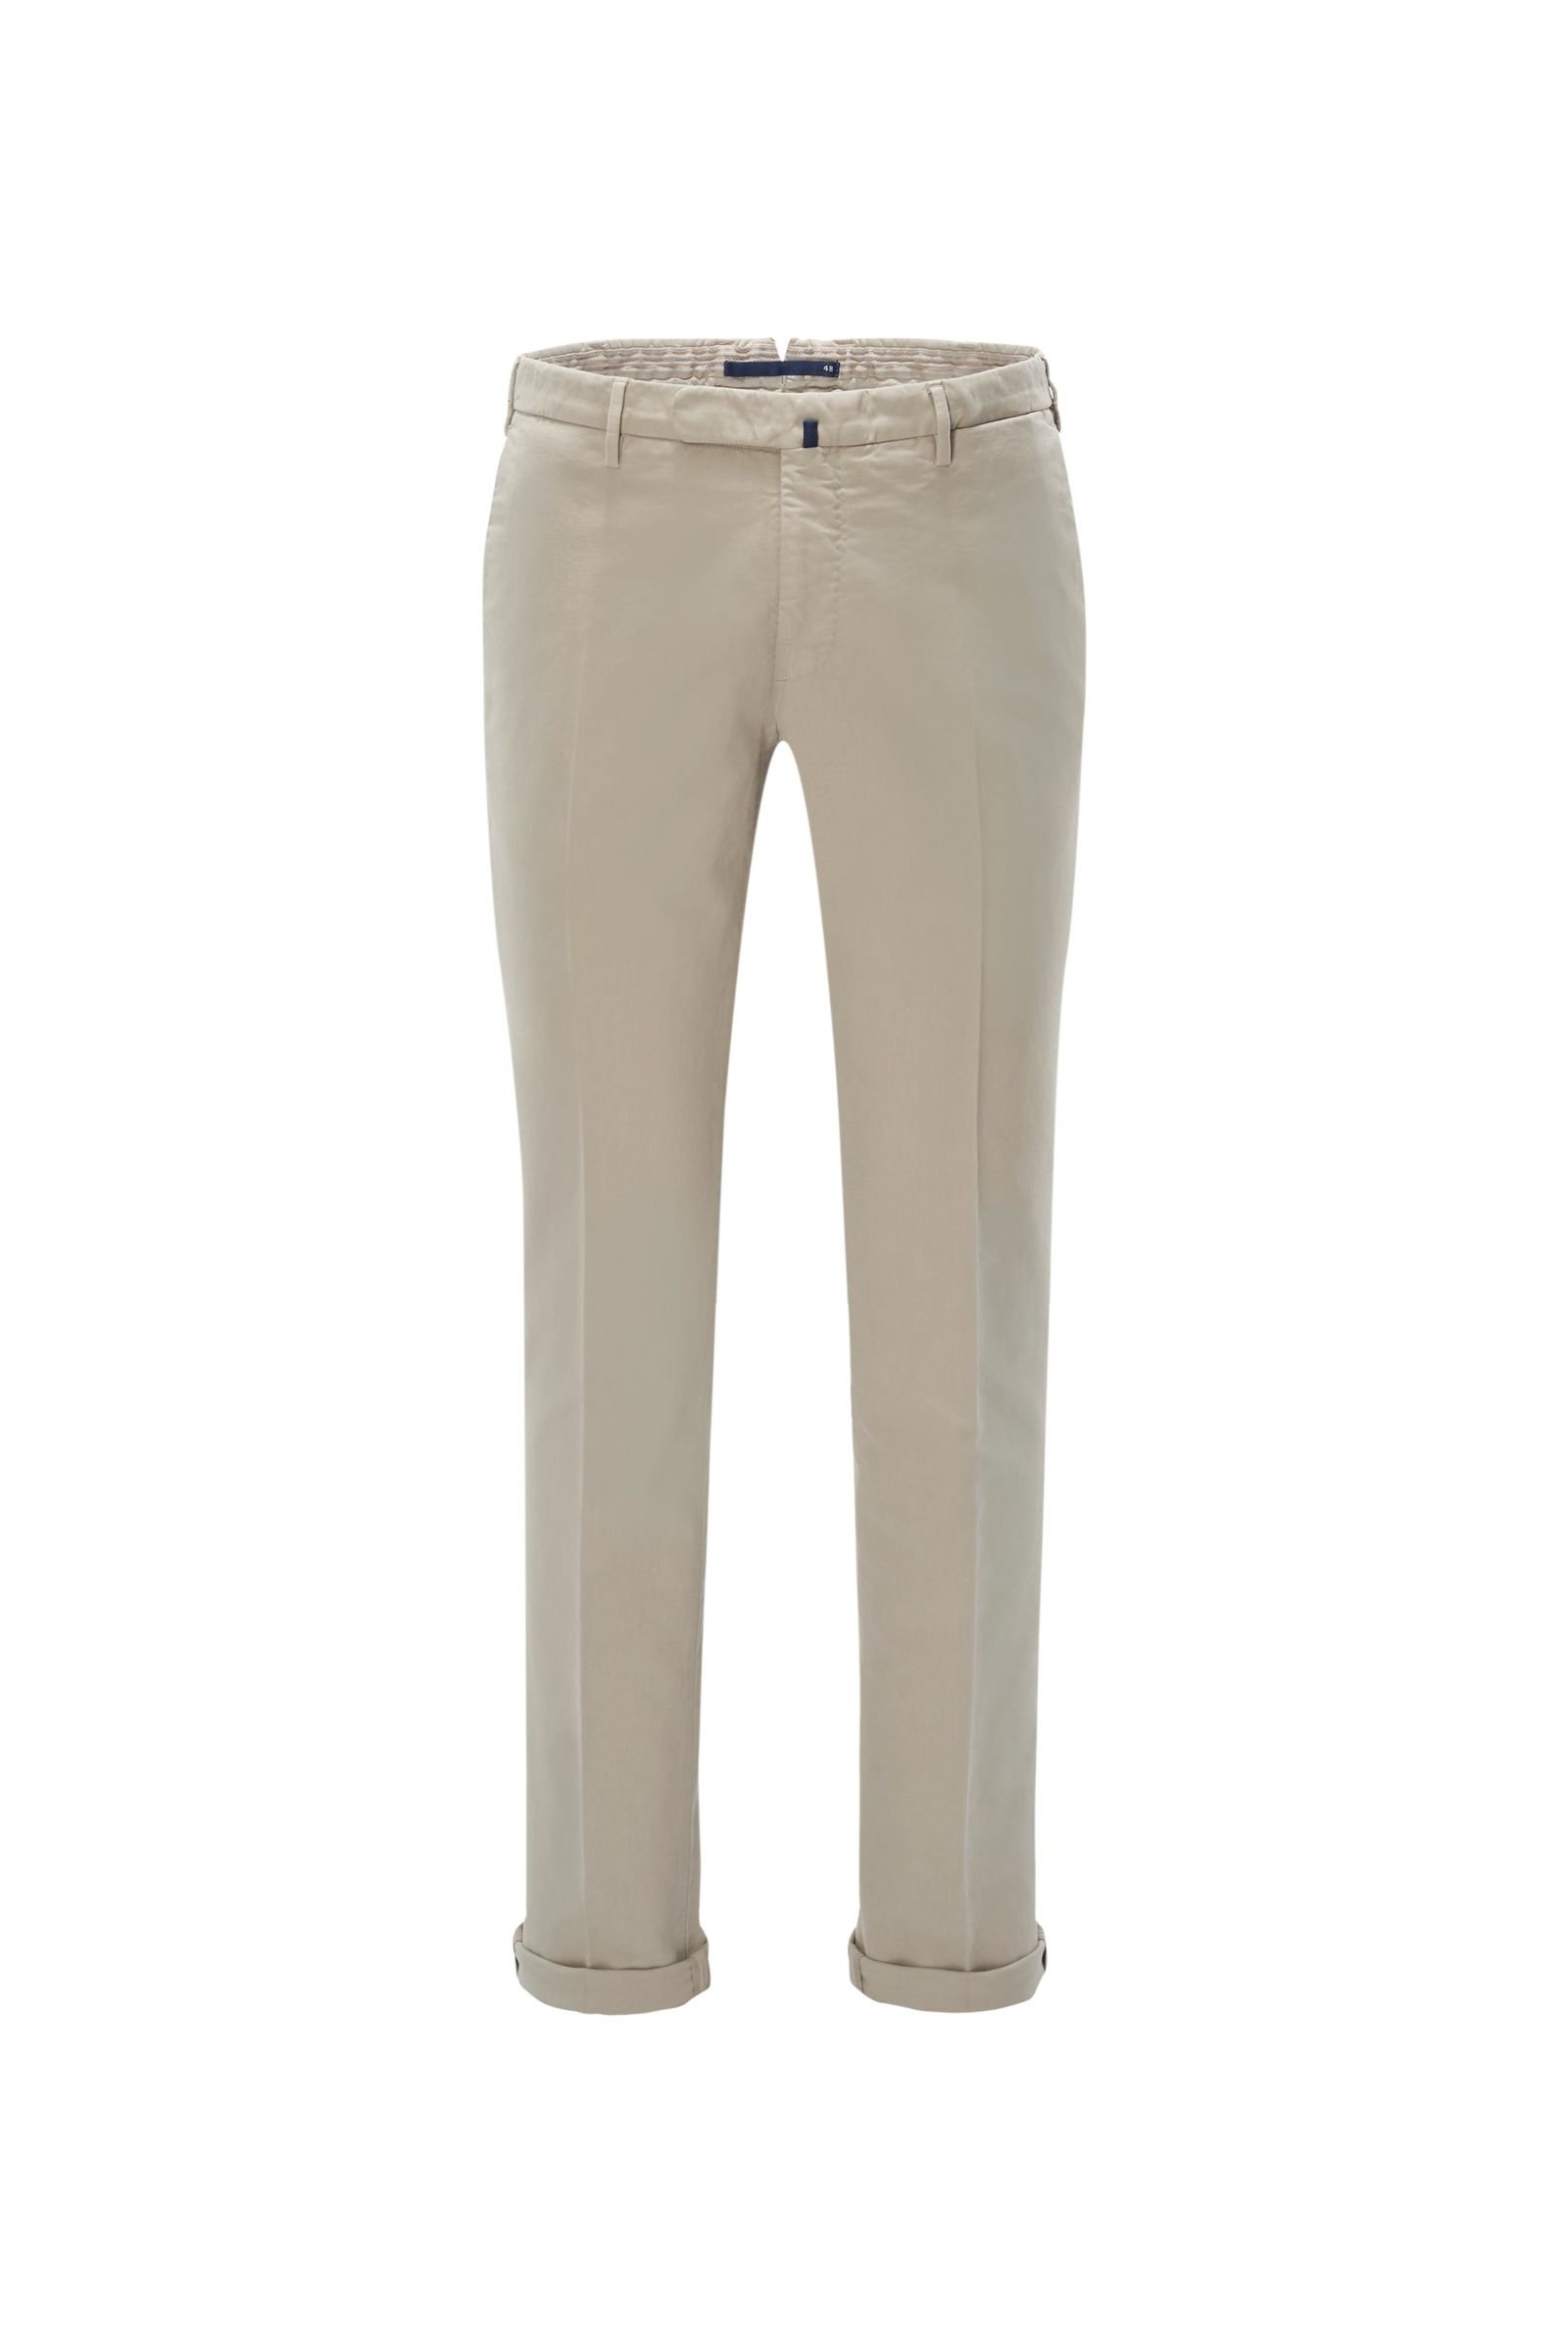 Cotton trousers 'High Comfort' beige